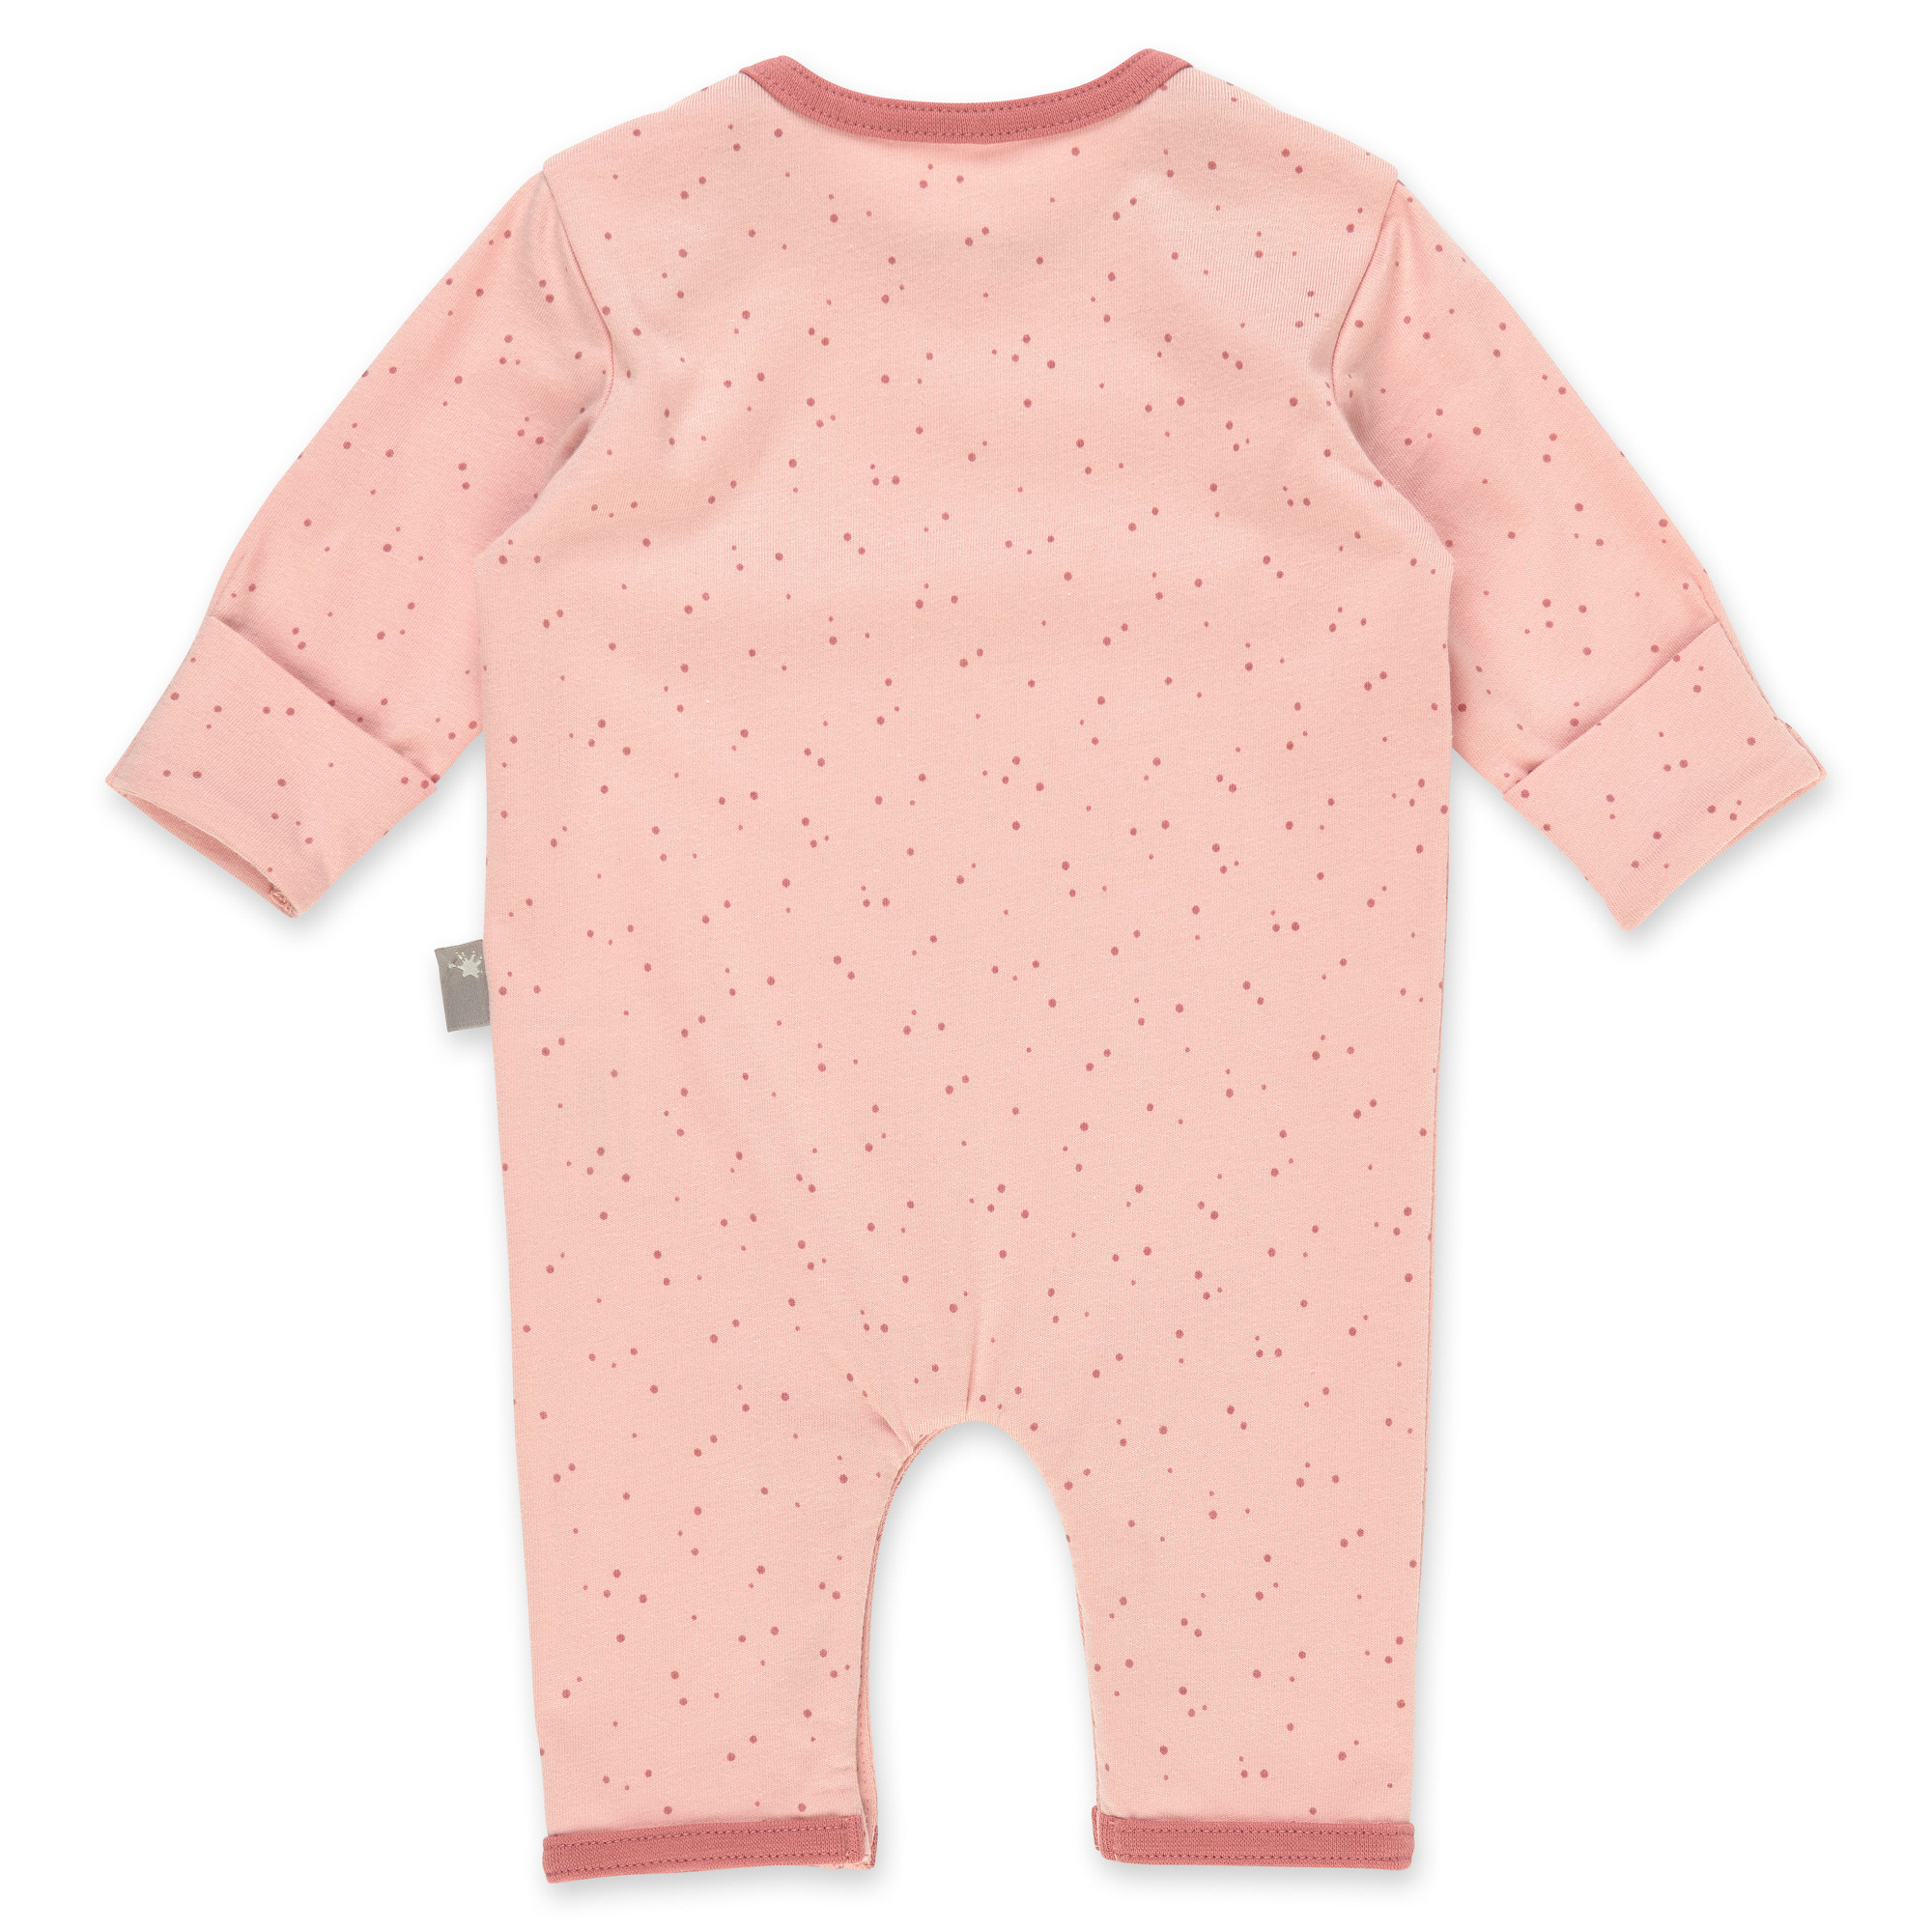 Long-sleeved baby romper overall fox, scratch mittens